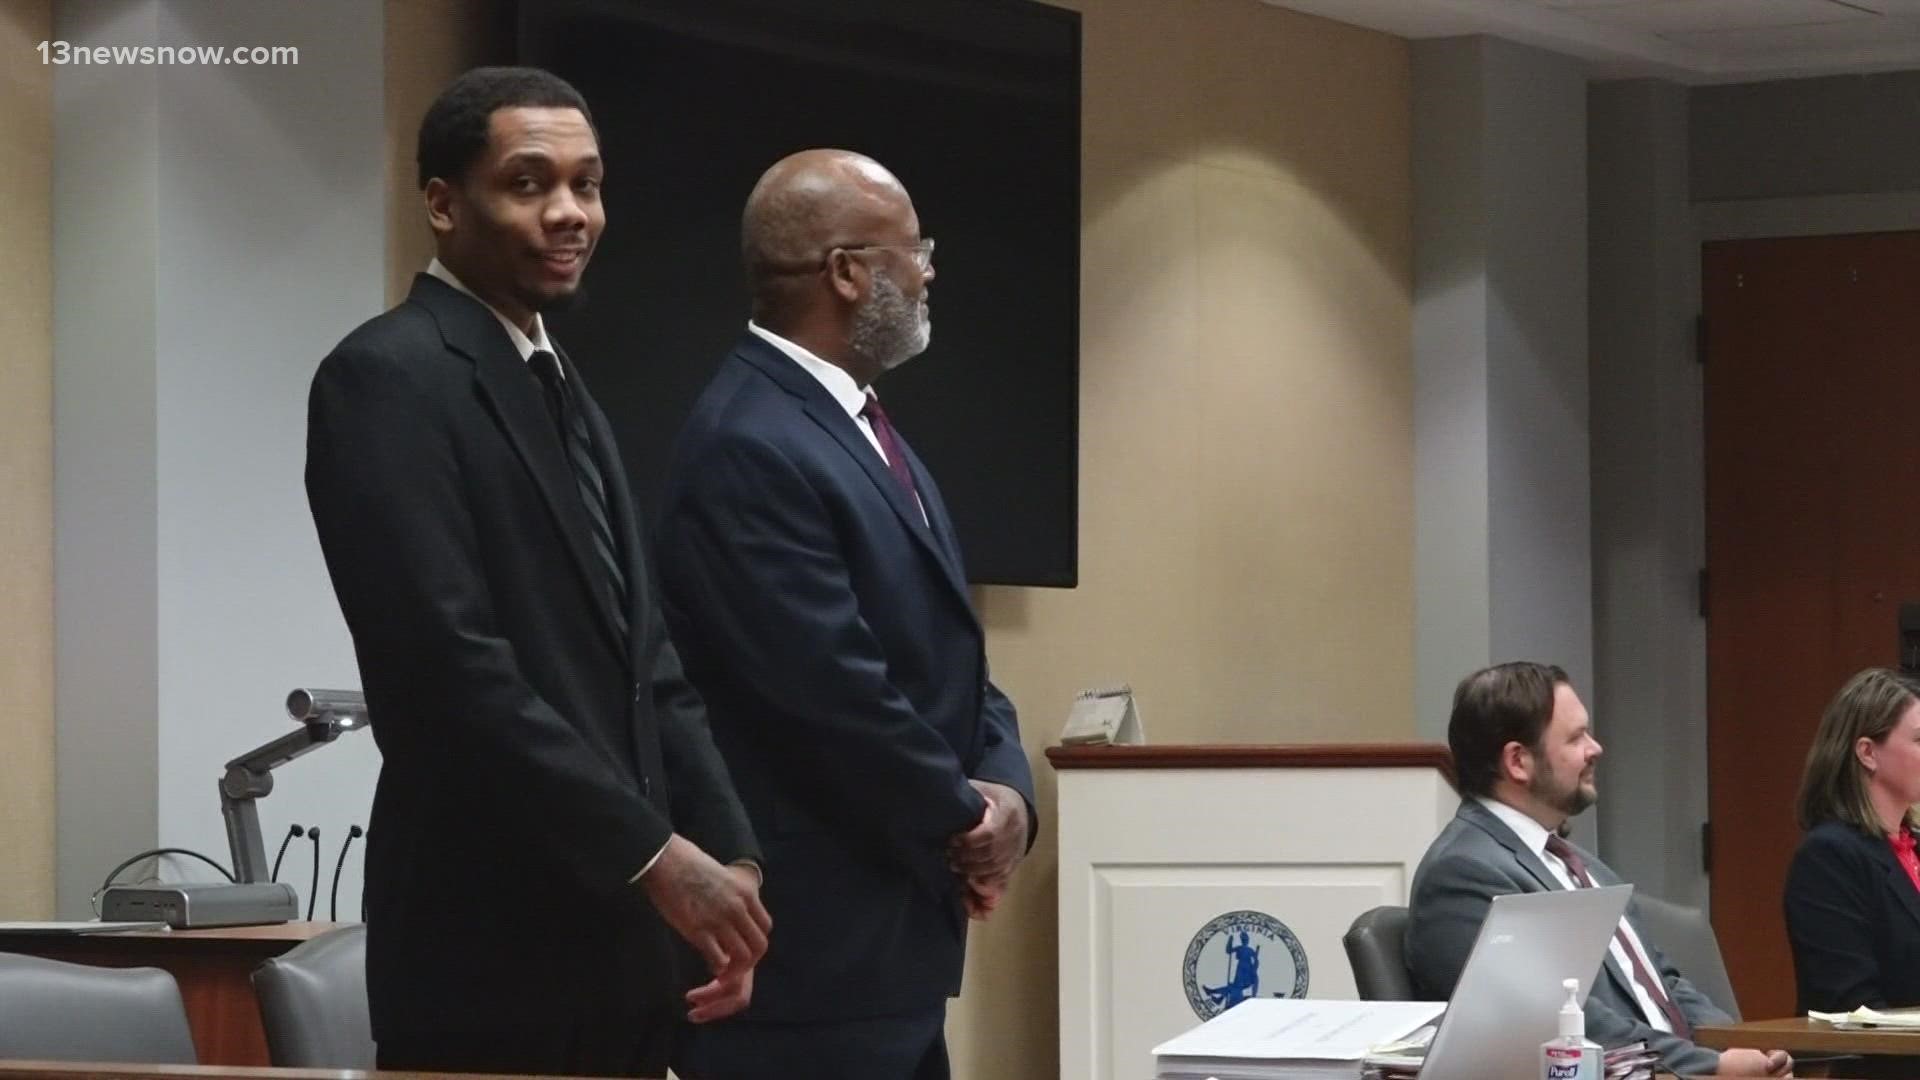 Malik Kearney was accused of hitting a Virginia Beach police officer with his car at the Oceanfront in March 2021.